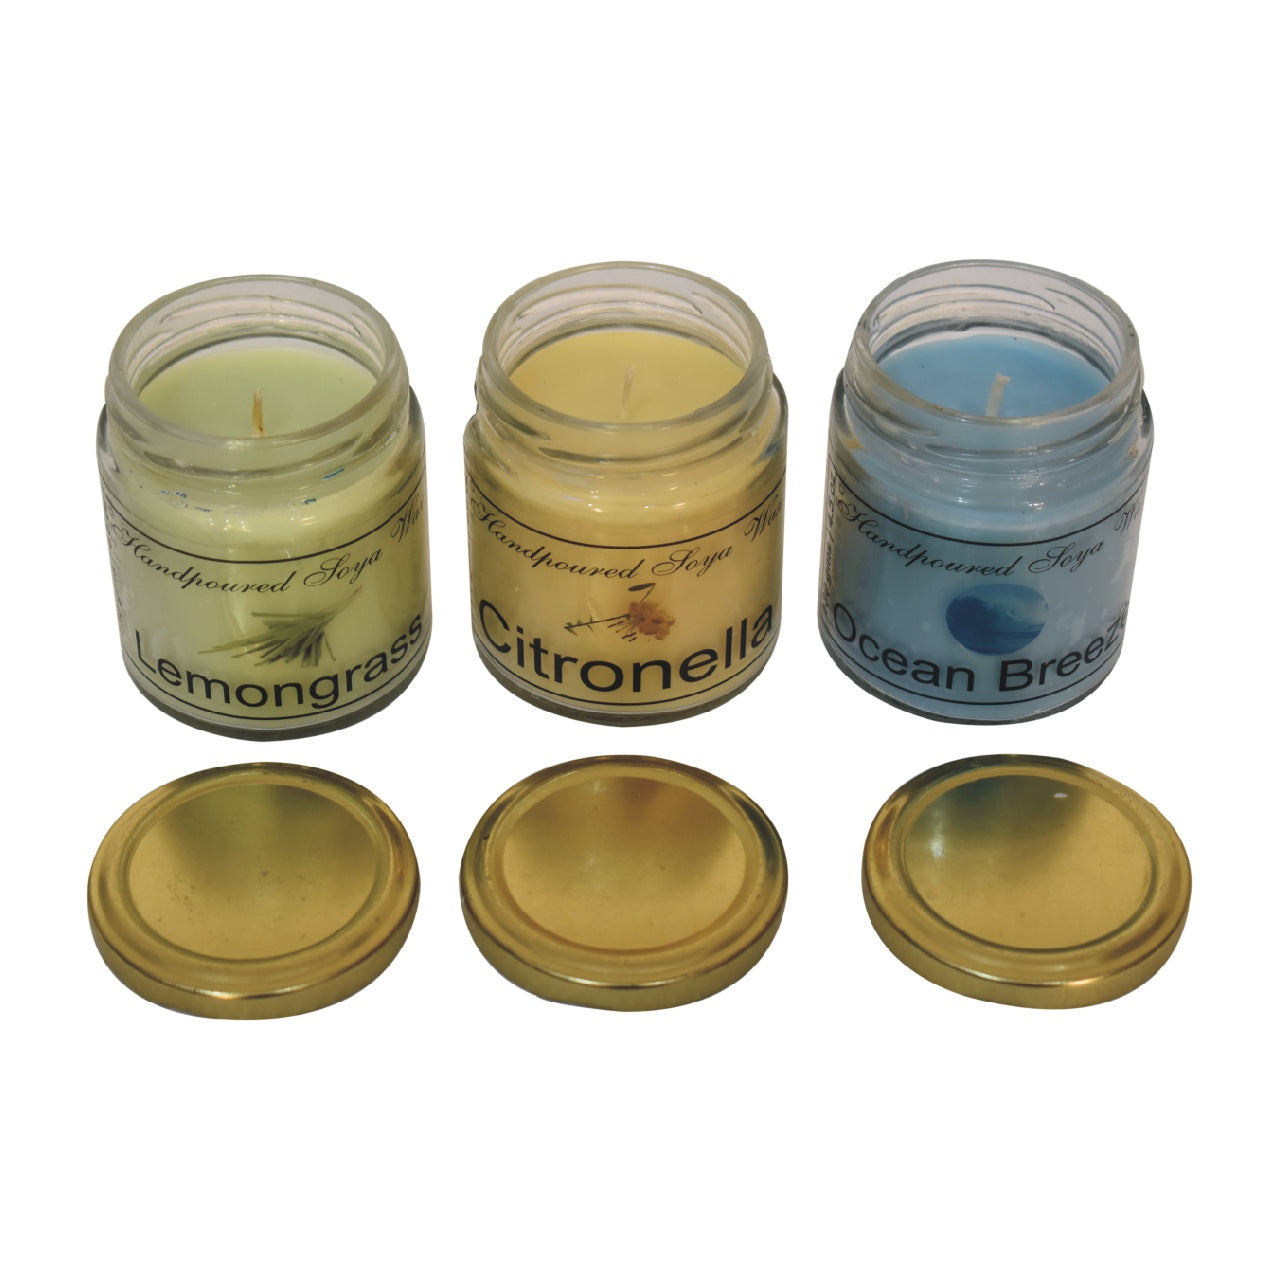 View Candle Gift Set of 3 Lemongrass Citronella Summer Tides information